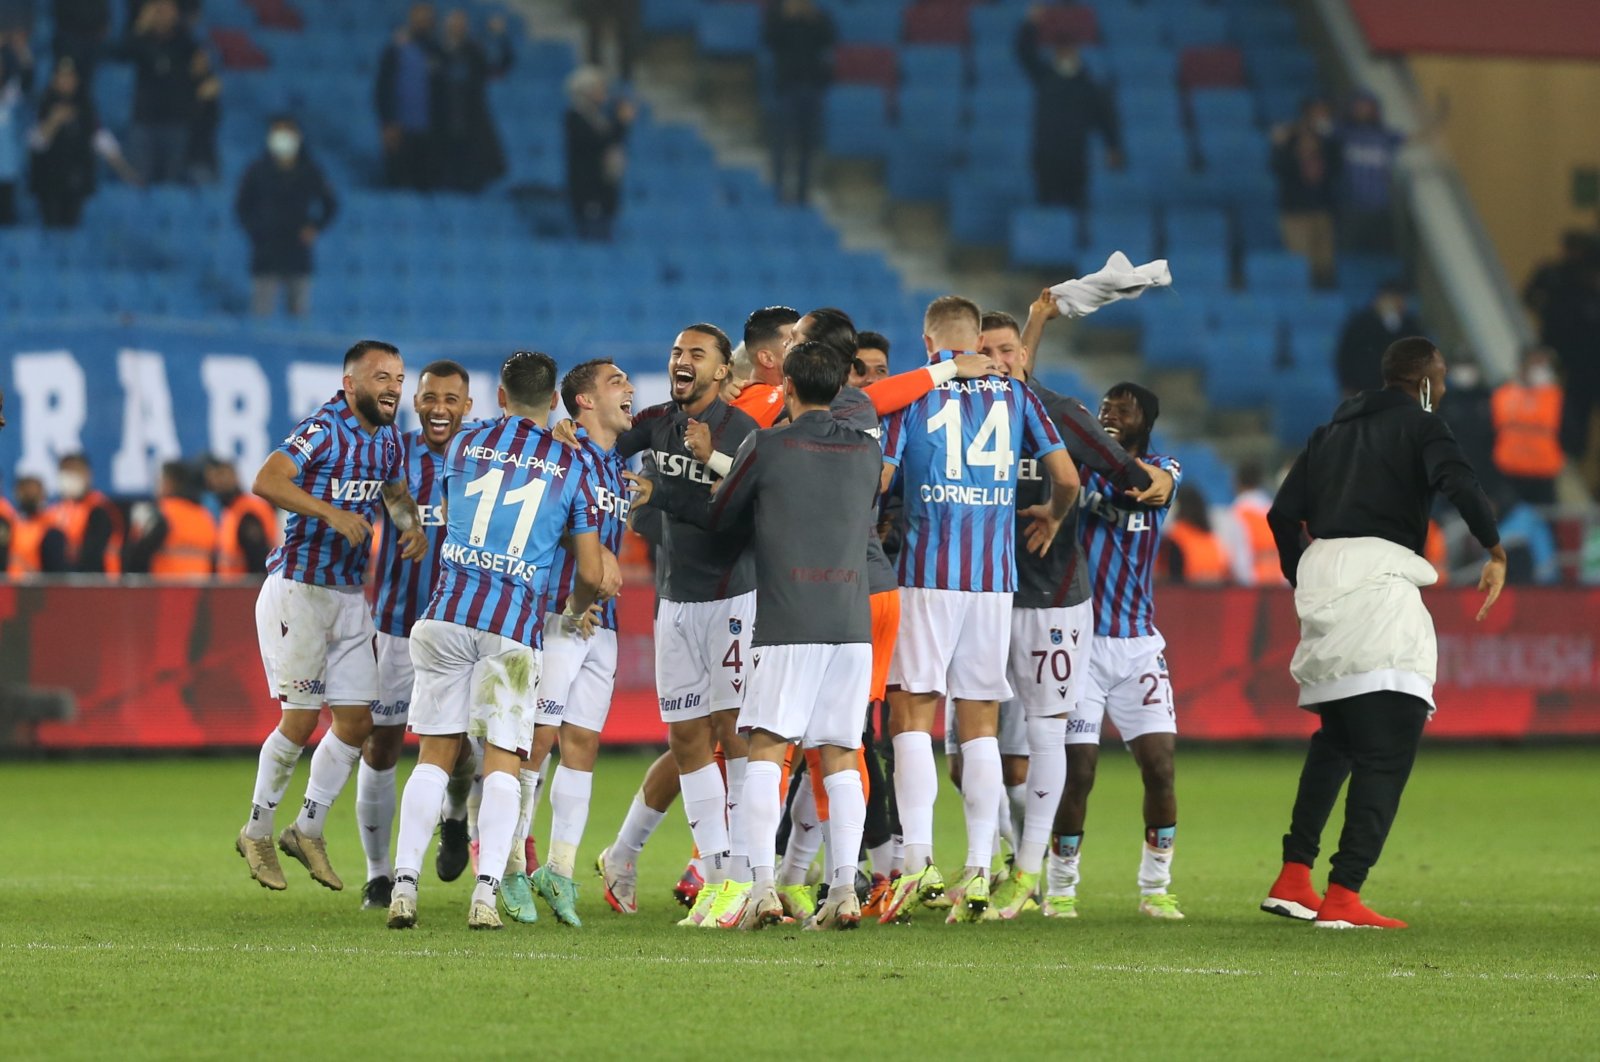 Trabzonspor players celebrate their 3-1 win over Fenerbahçe after a Turkish Süper Lig match at the Medical Park stadium, Trabzon, Turkey, Oct. 17, 2021. (AA Photo)